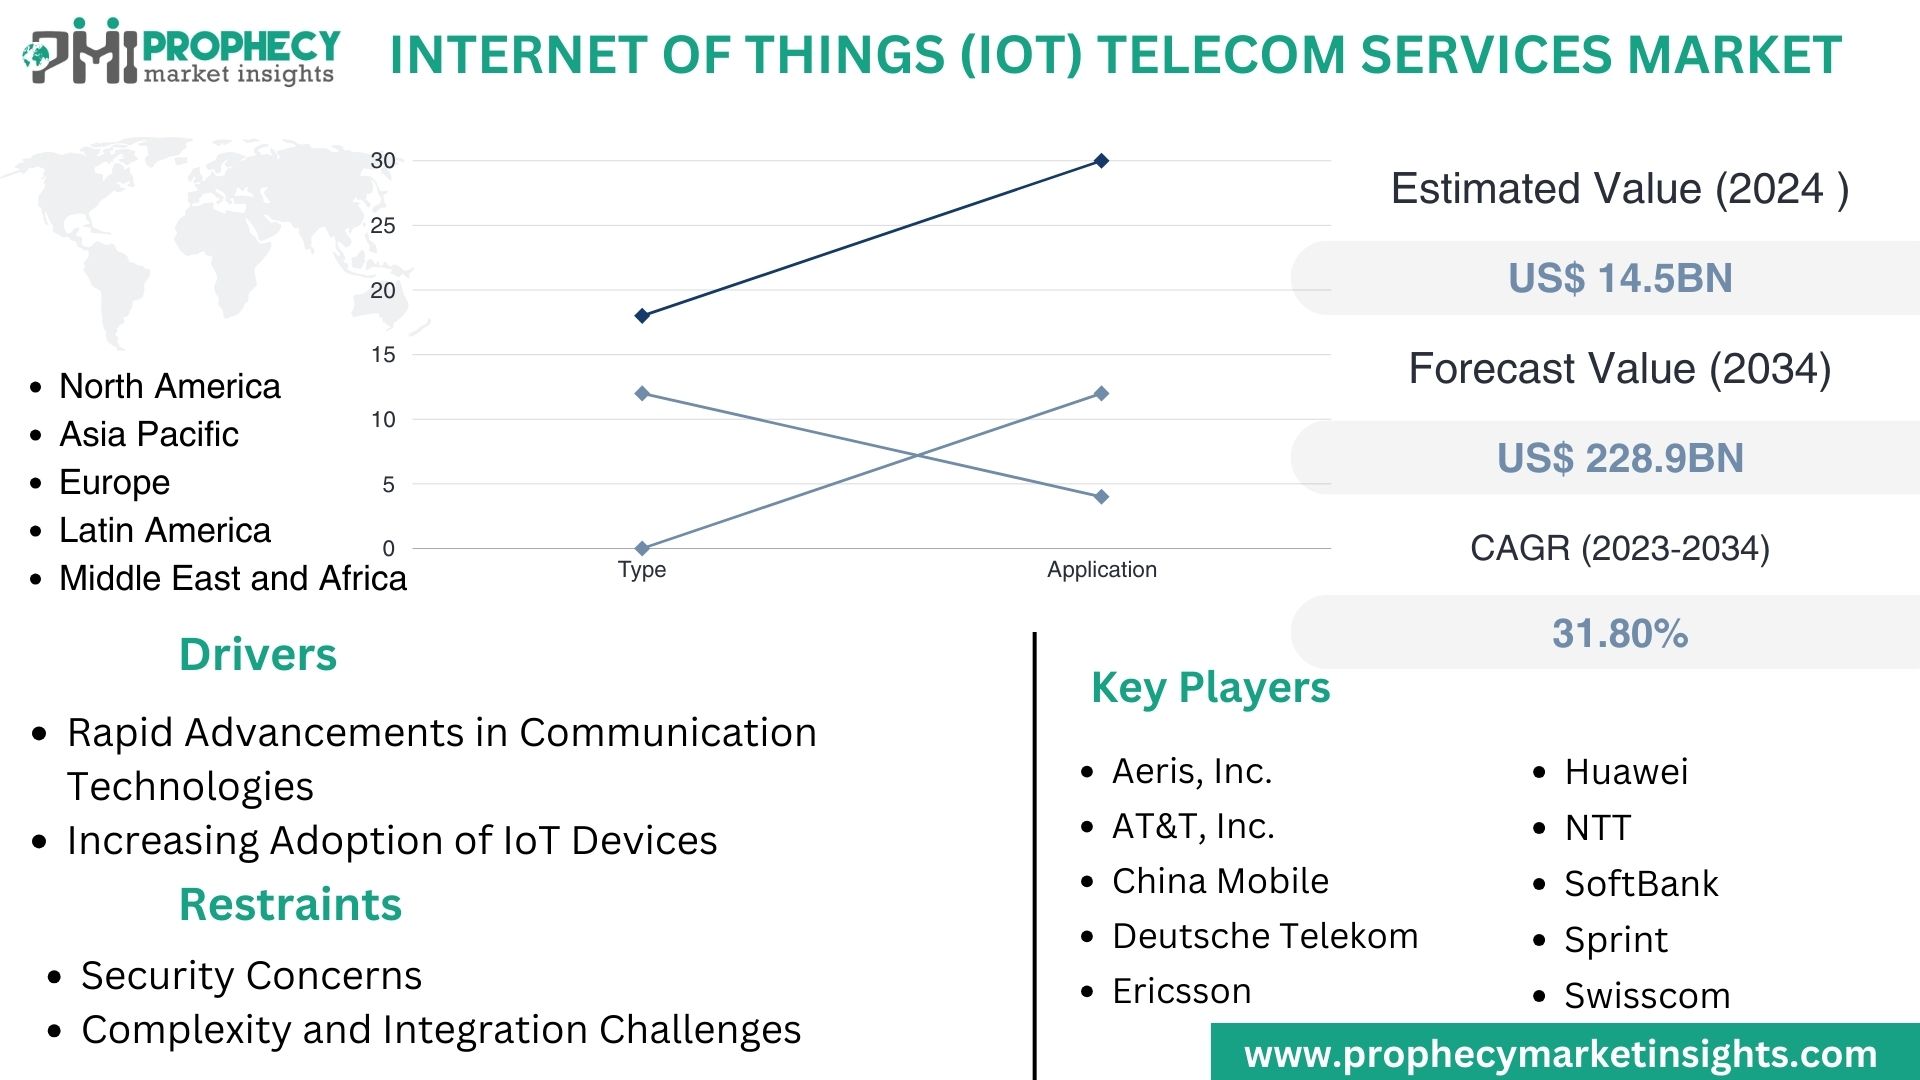 Internet of Things (IoT) Telecom Services Market